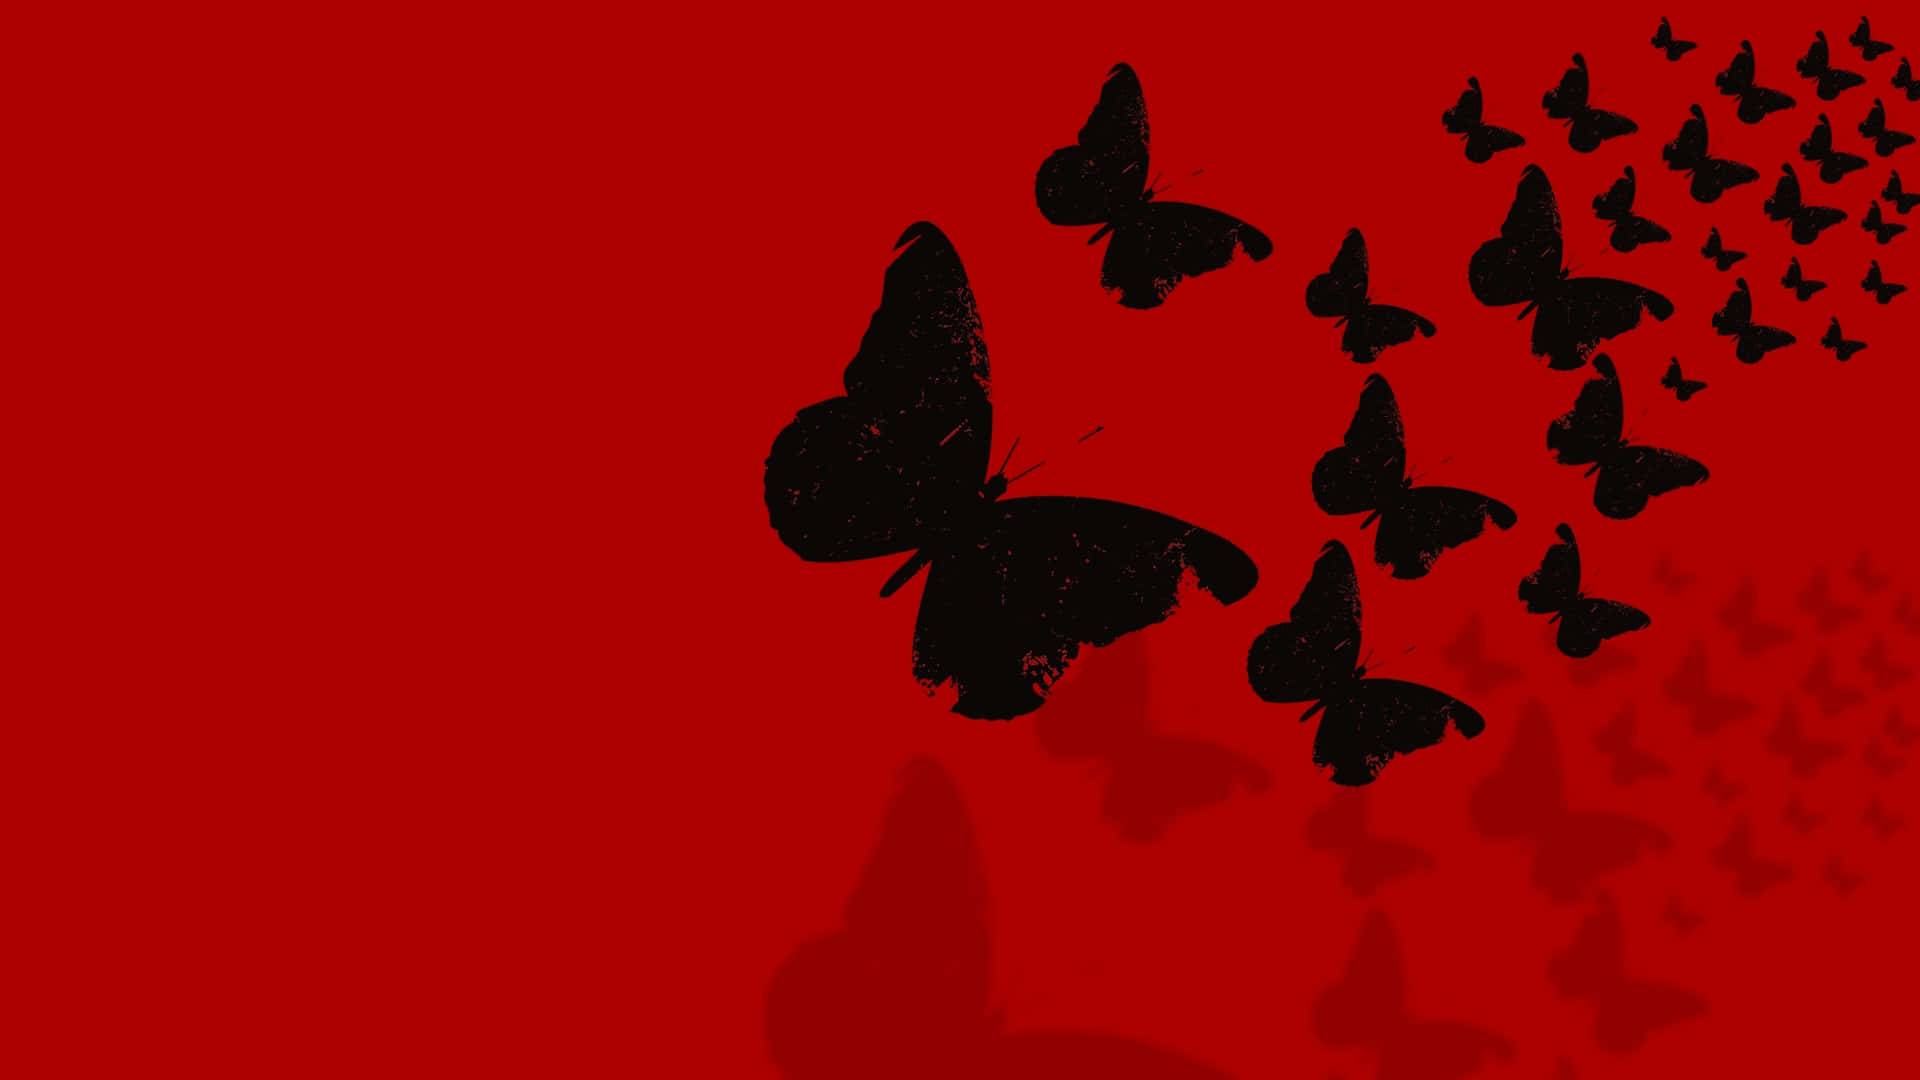 Enigmatic Dark Butterfly on a Mysterious Background Wallpaper